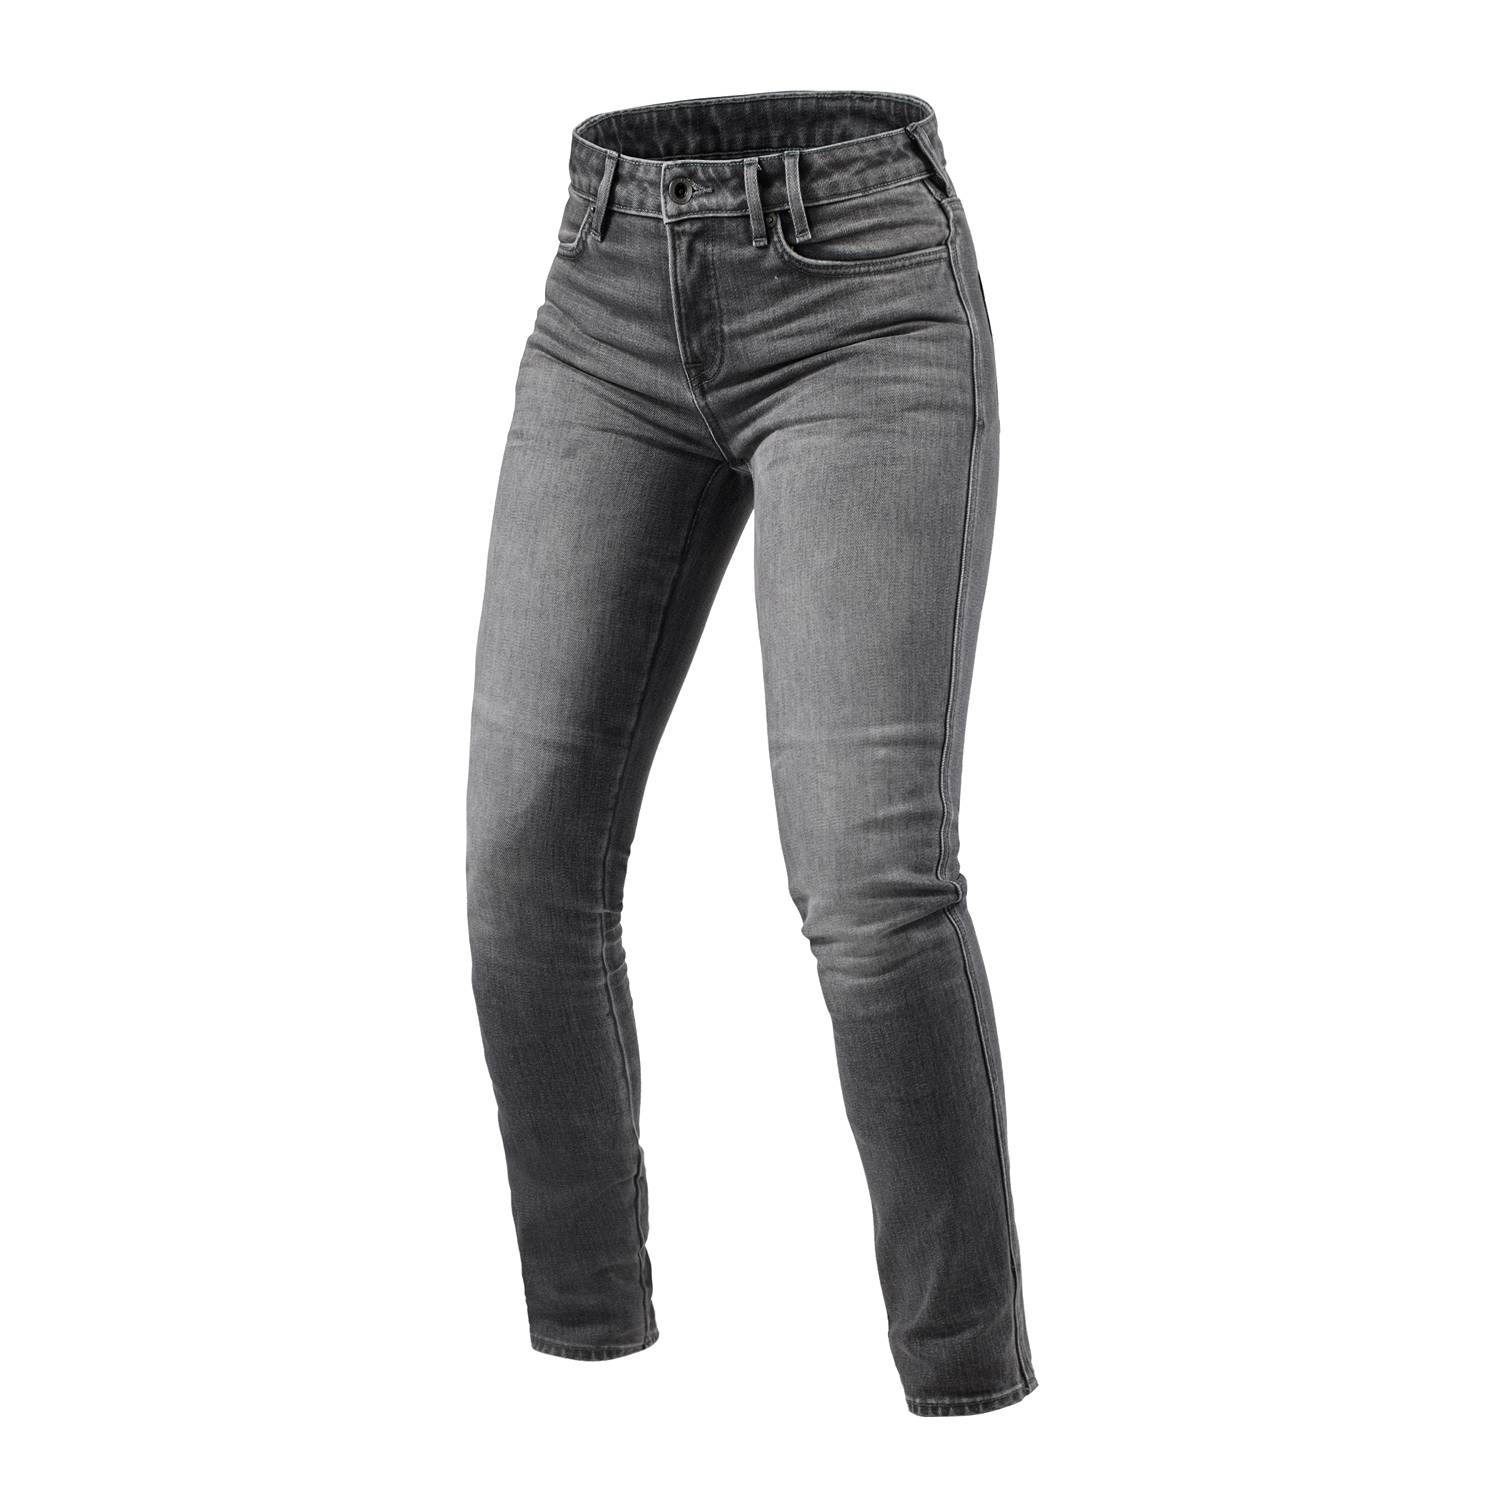 Image of EU REV'IT! Jeans Shelby 2 Ladies SK Medium Grey Stone L32 Taille L32/W28